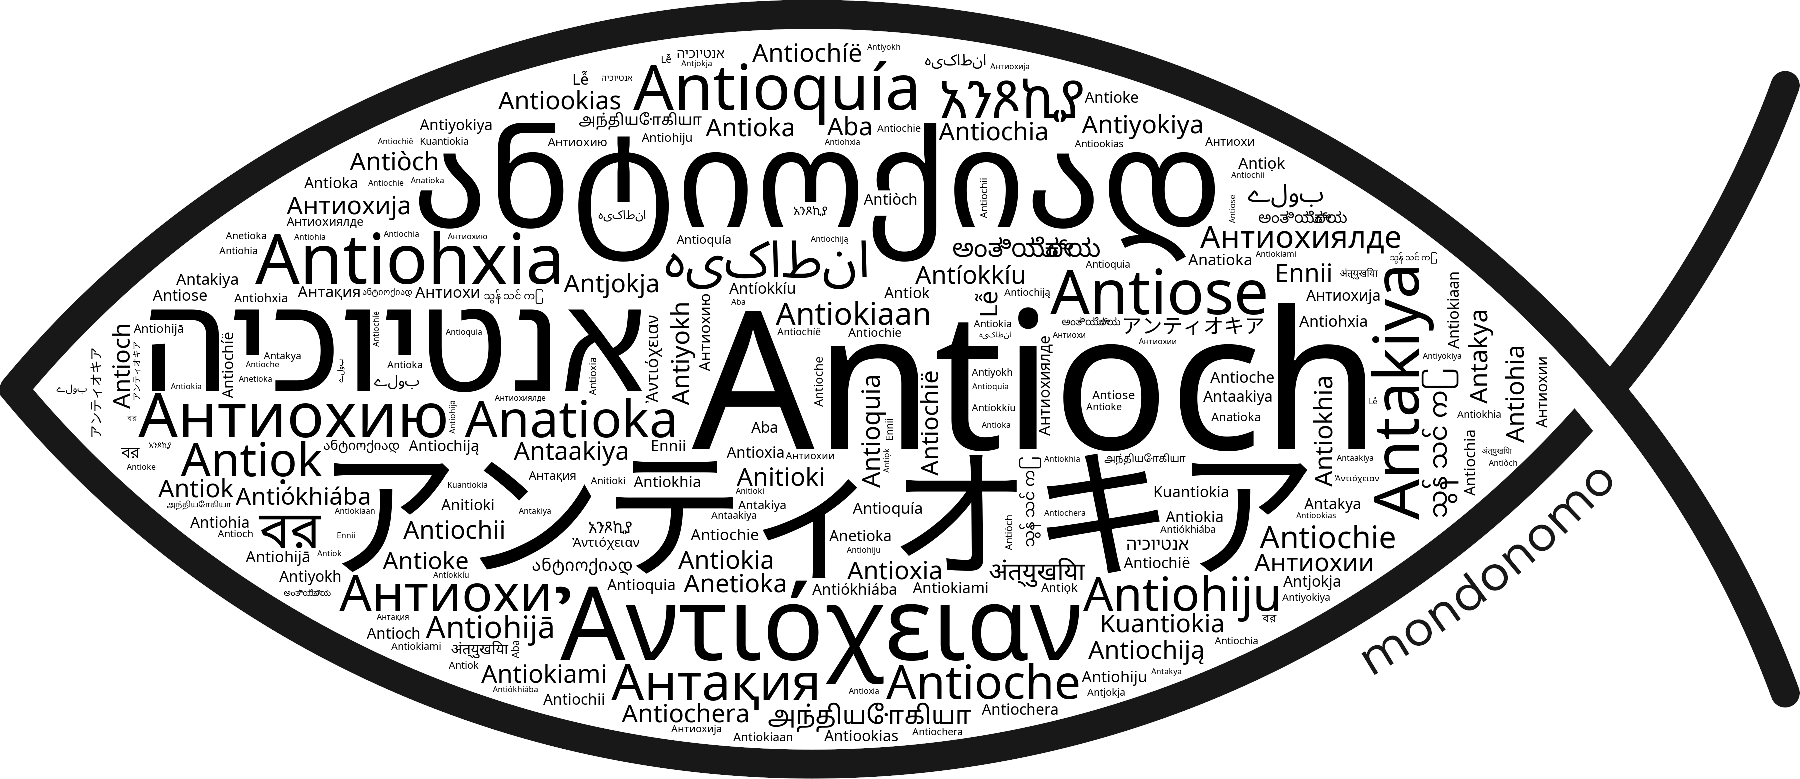 Name Antioch in the world's Bibles